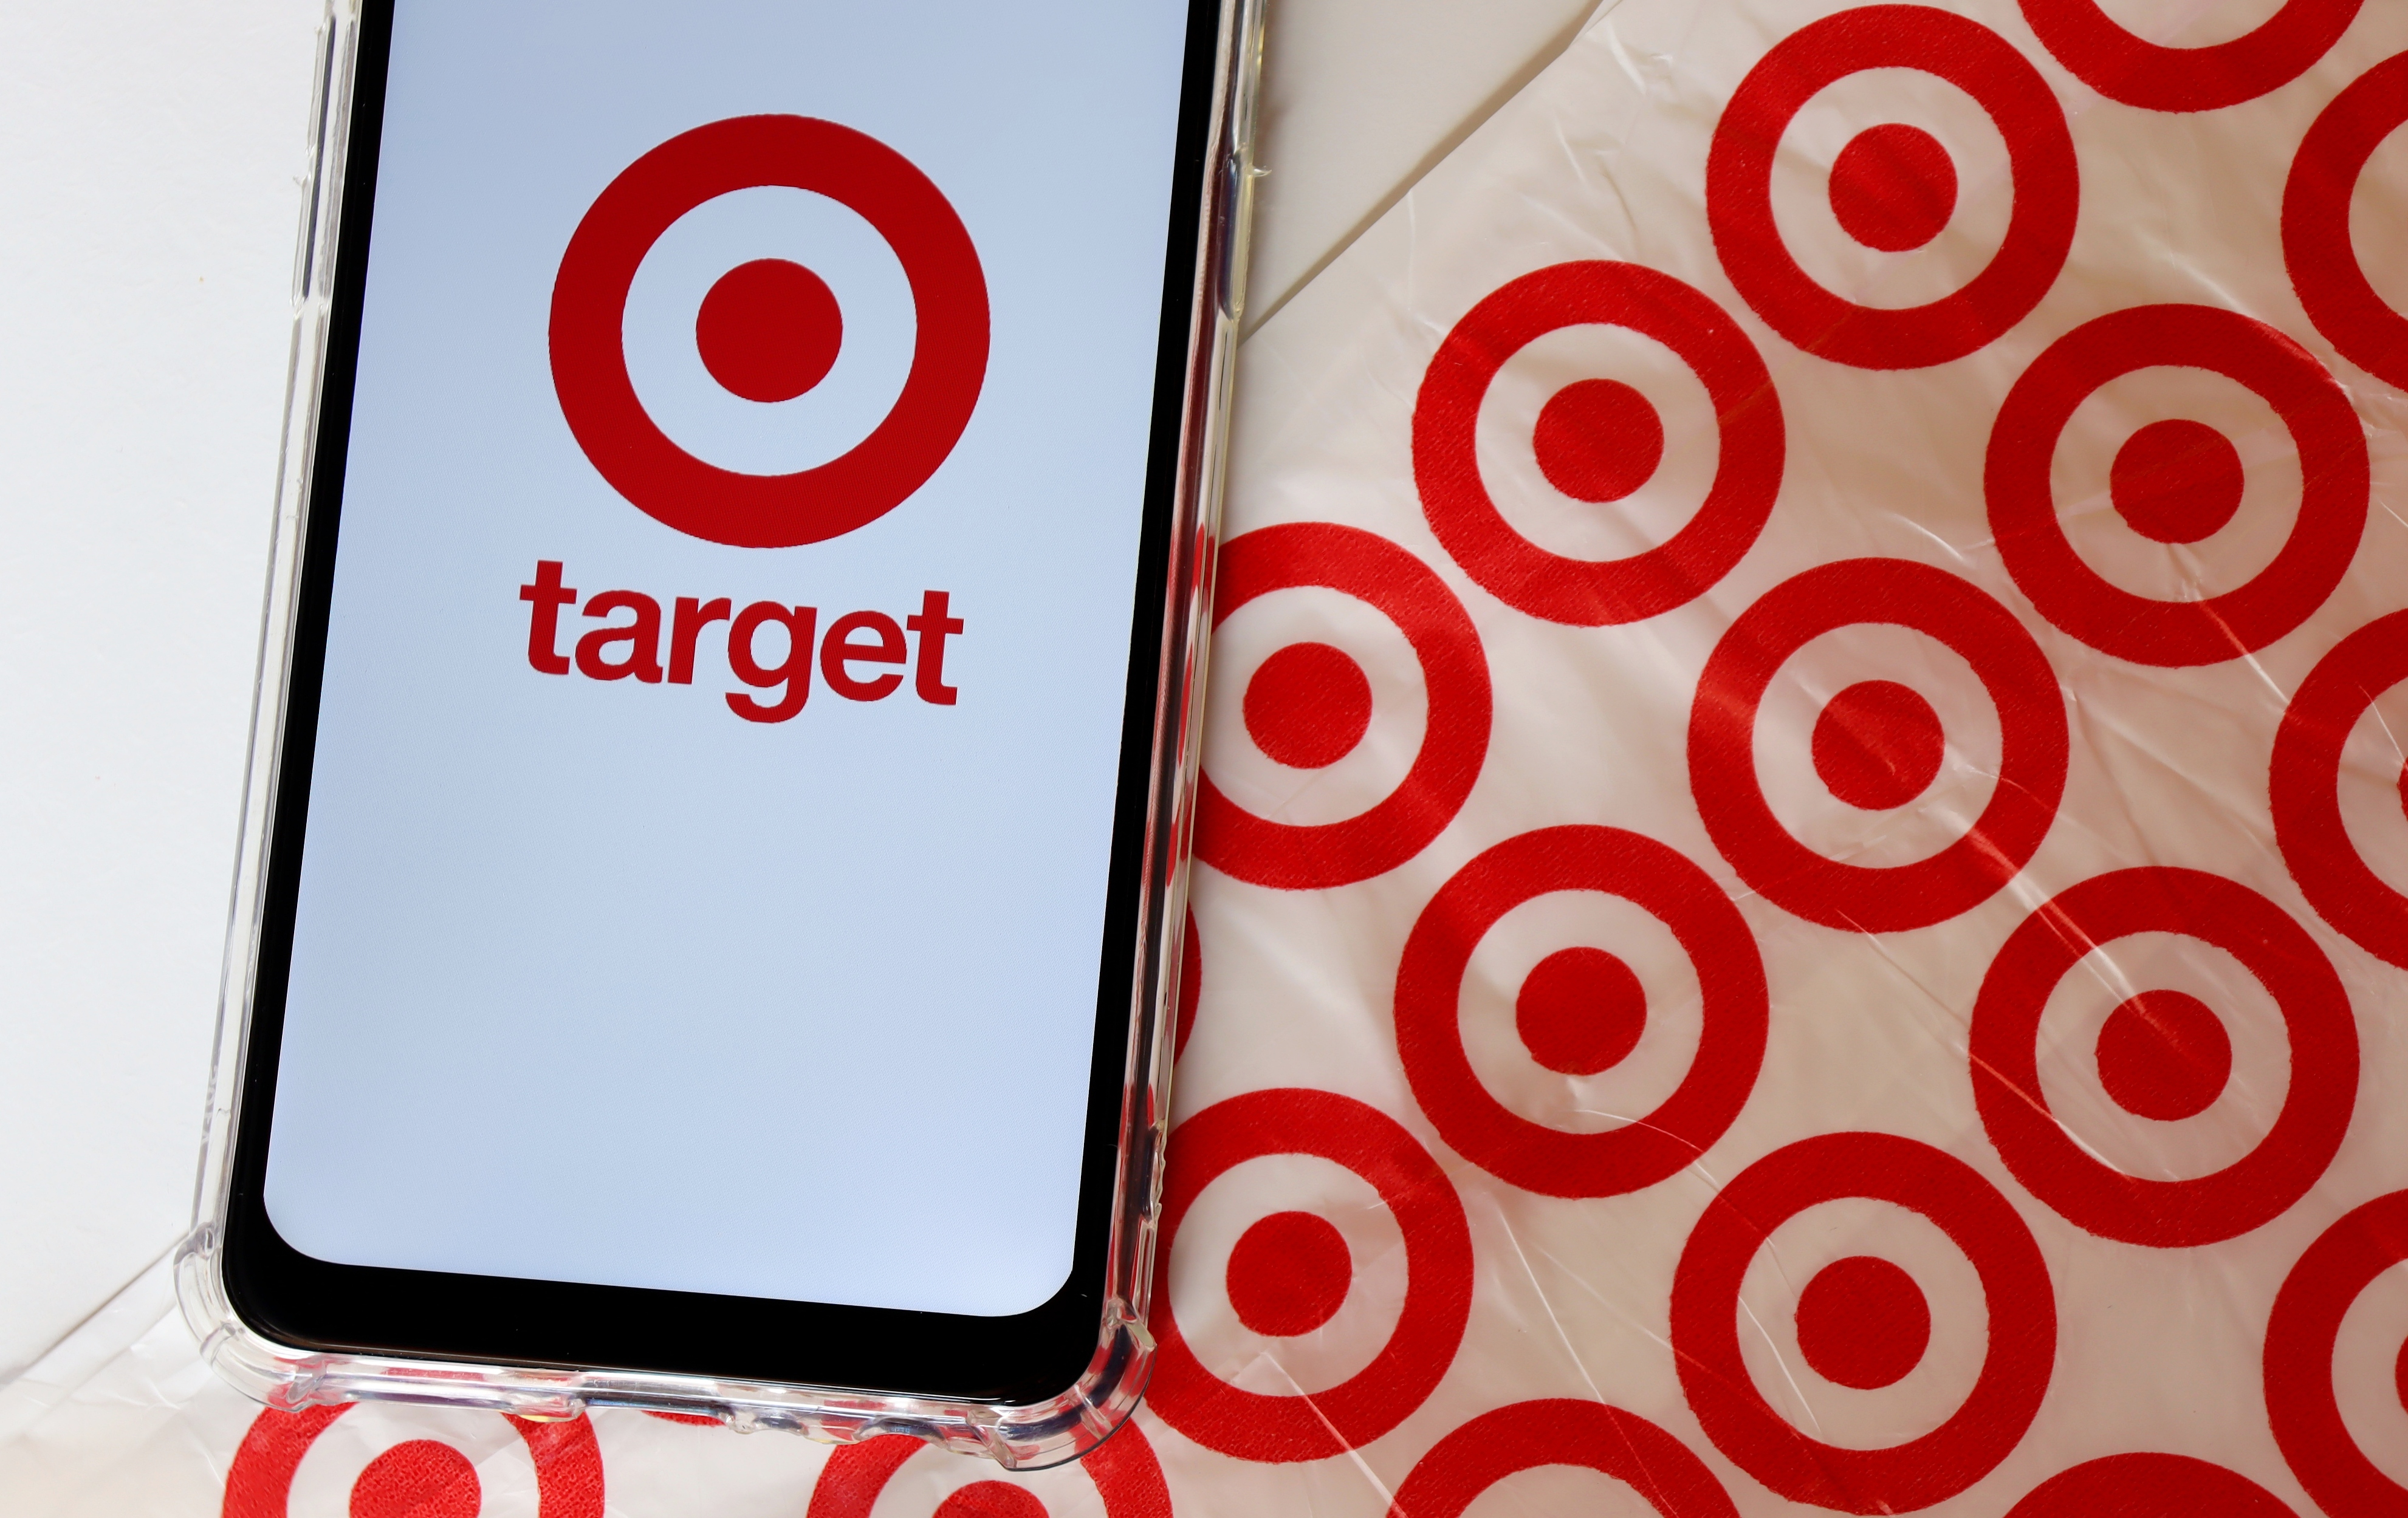 A smartphone displaying the Target logo next to a Target shopping bag